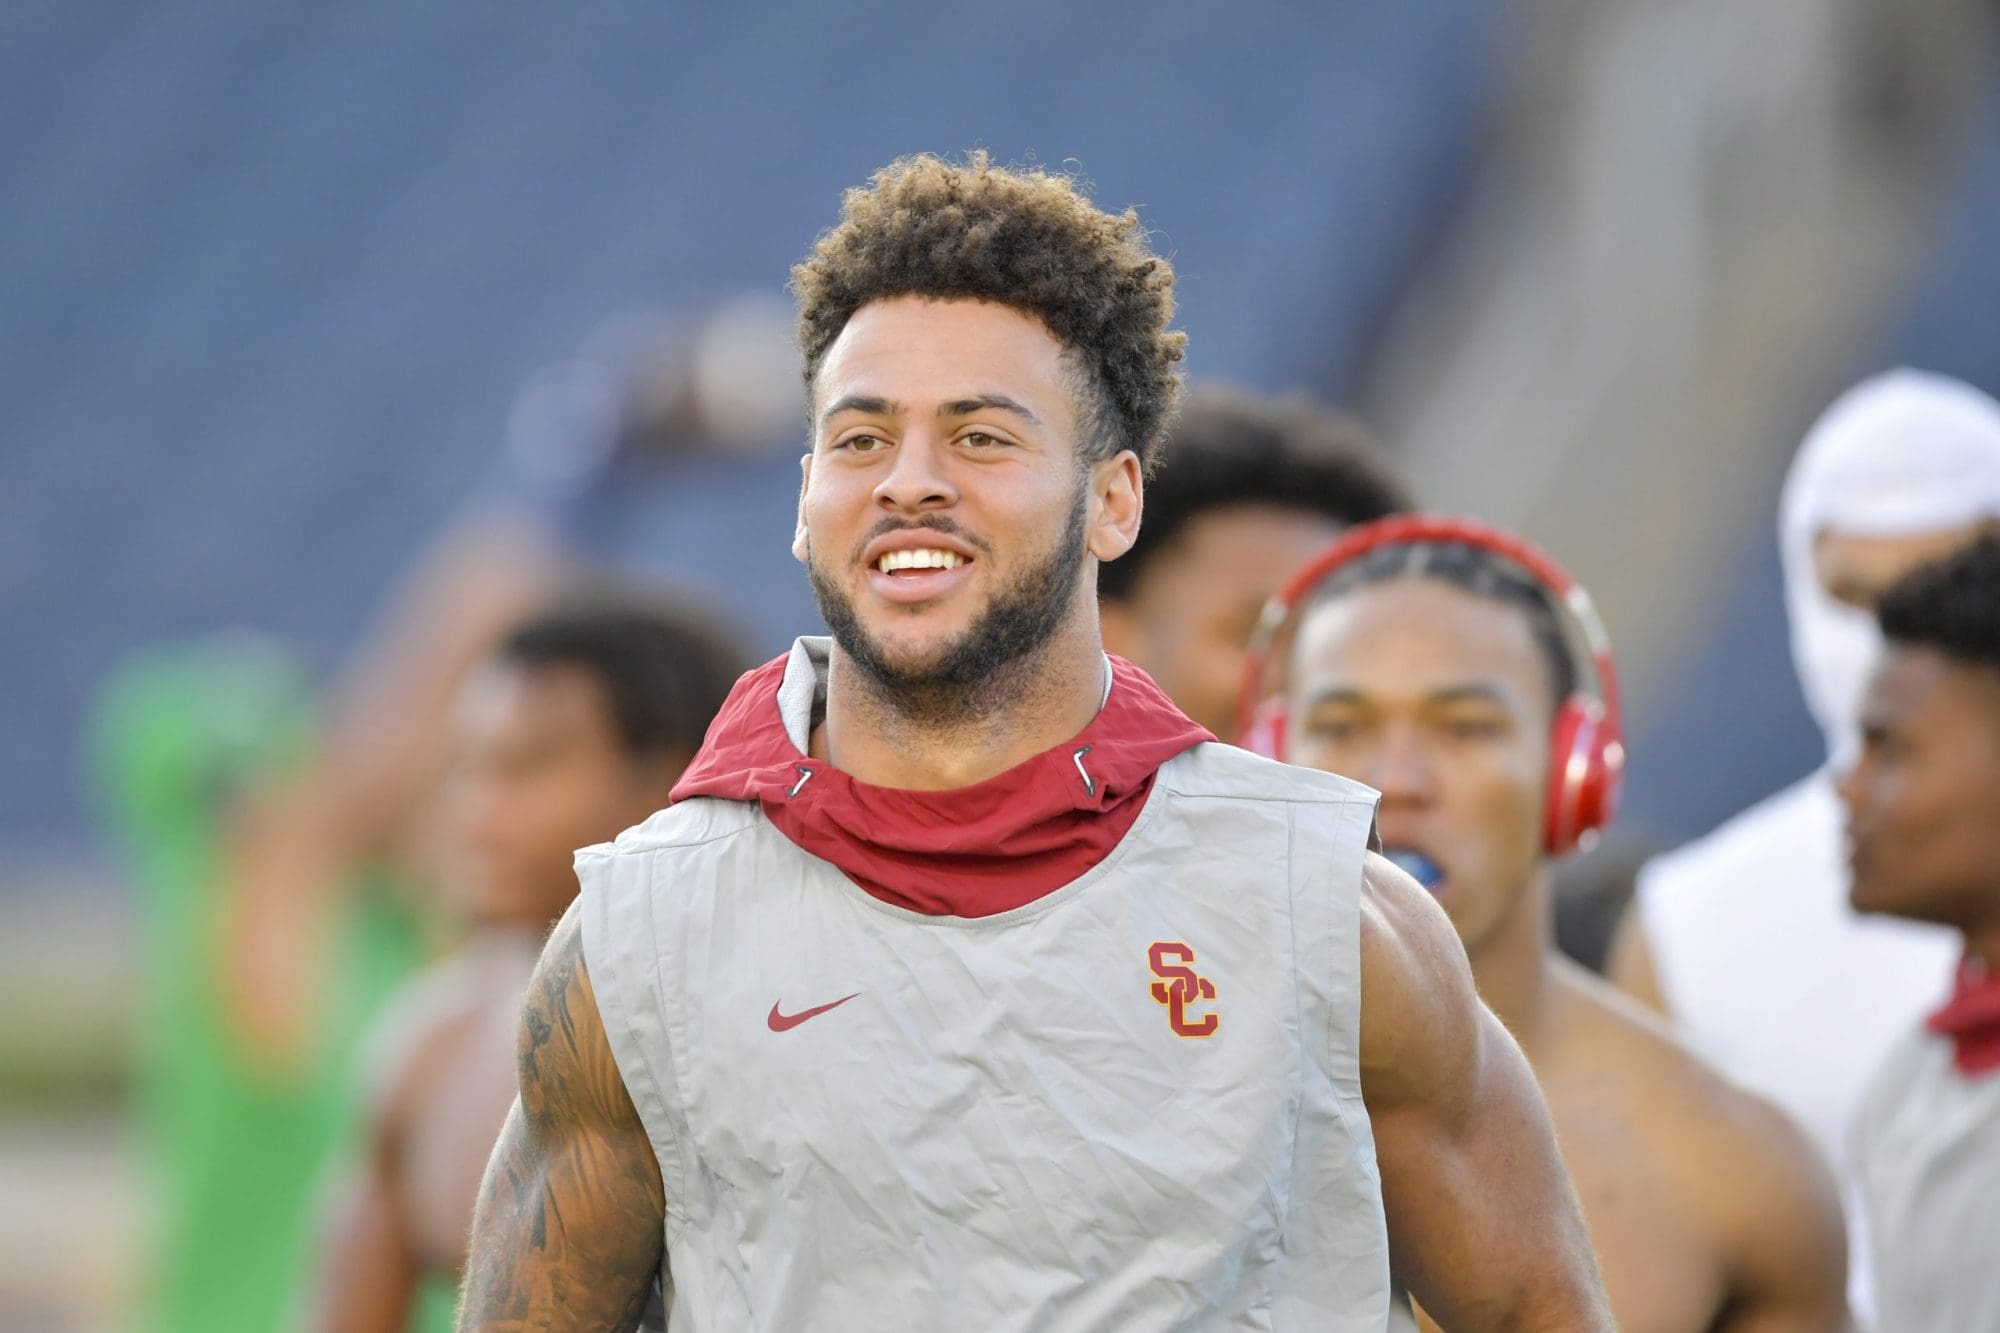 A young athlete with curly hair, wearing a red and gray usc football uniform and a padded vest, smiles while standing on a field with other players in the background.